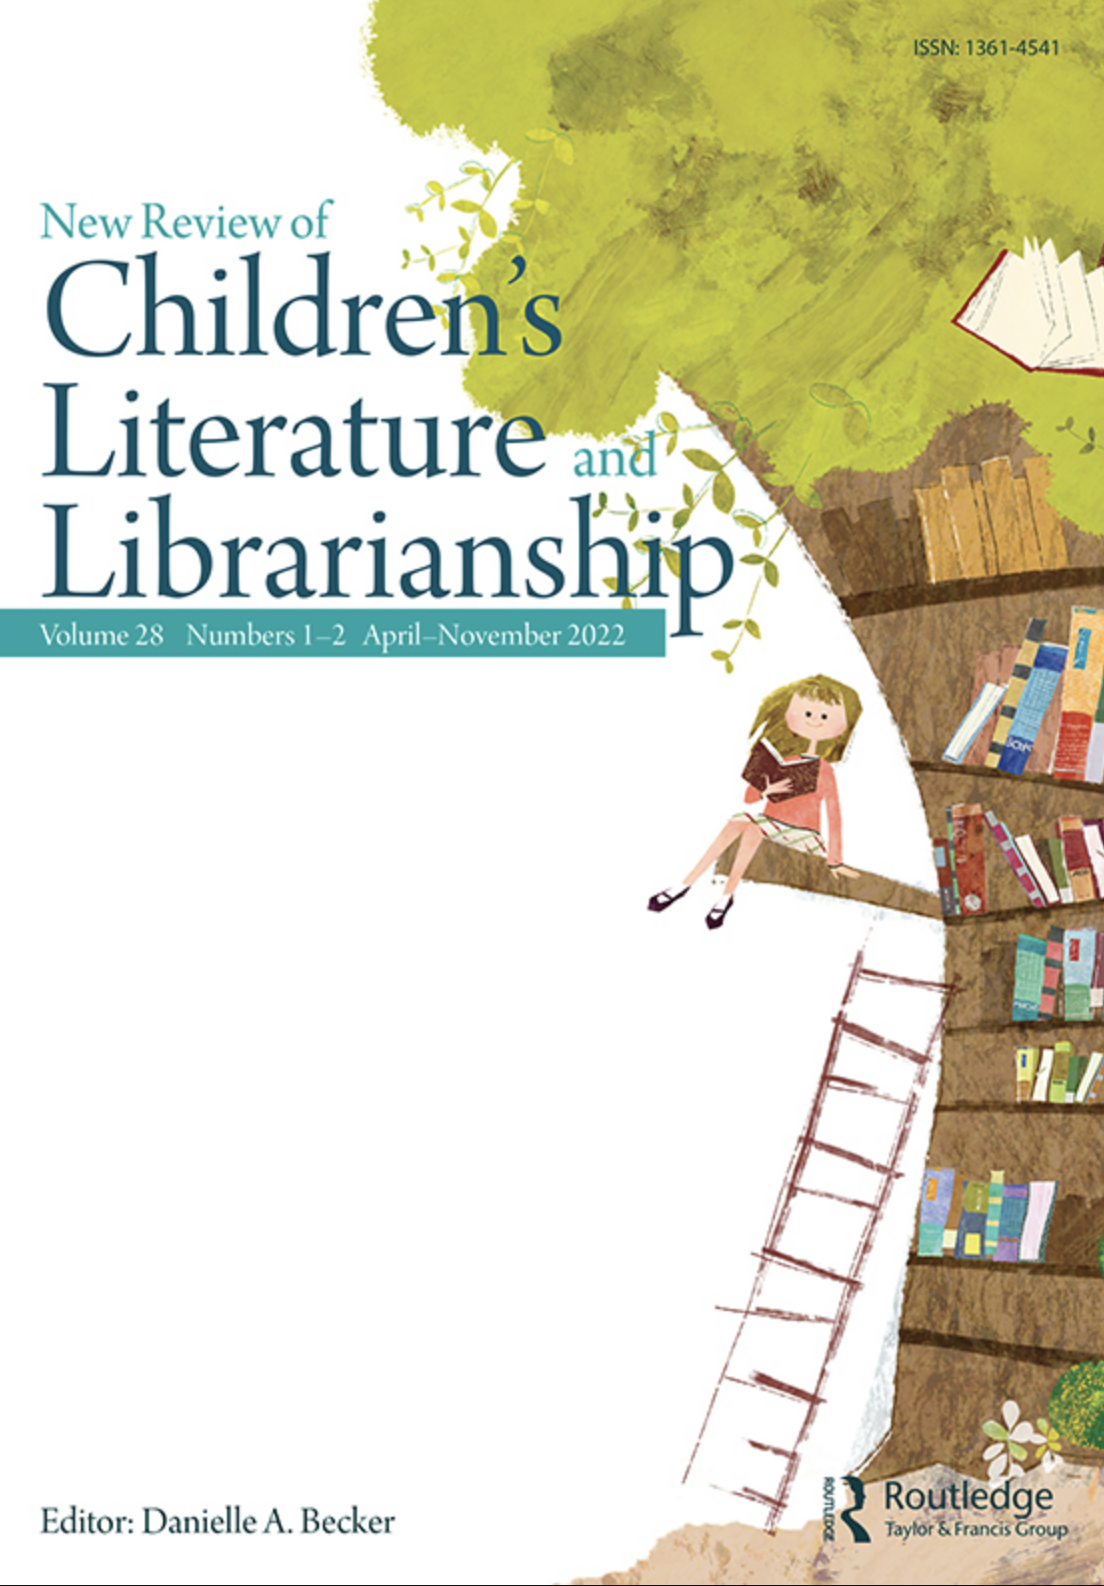 Post image of a New Review of Children's Literature and Librarianship featuring the covers of one of the journals' editions with an illustration of a young girl in a treehouse where the tree is also a bookshelf and the journals' title displayed in blue and teal.